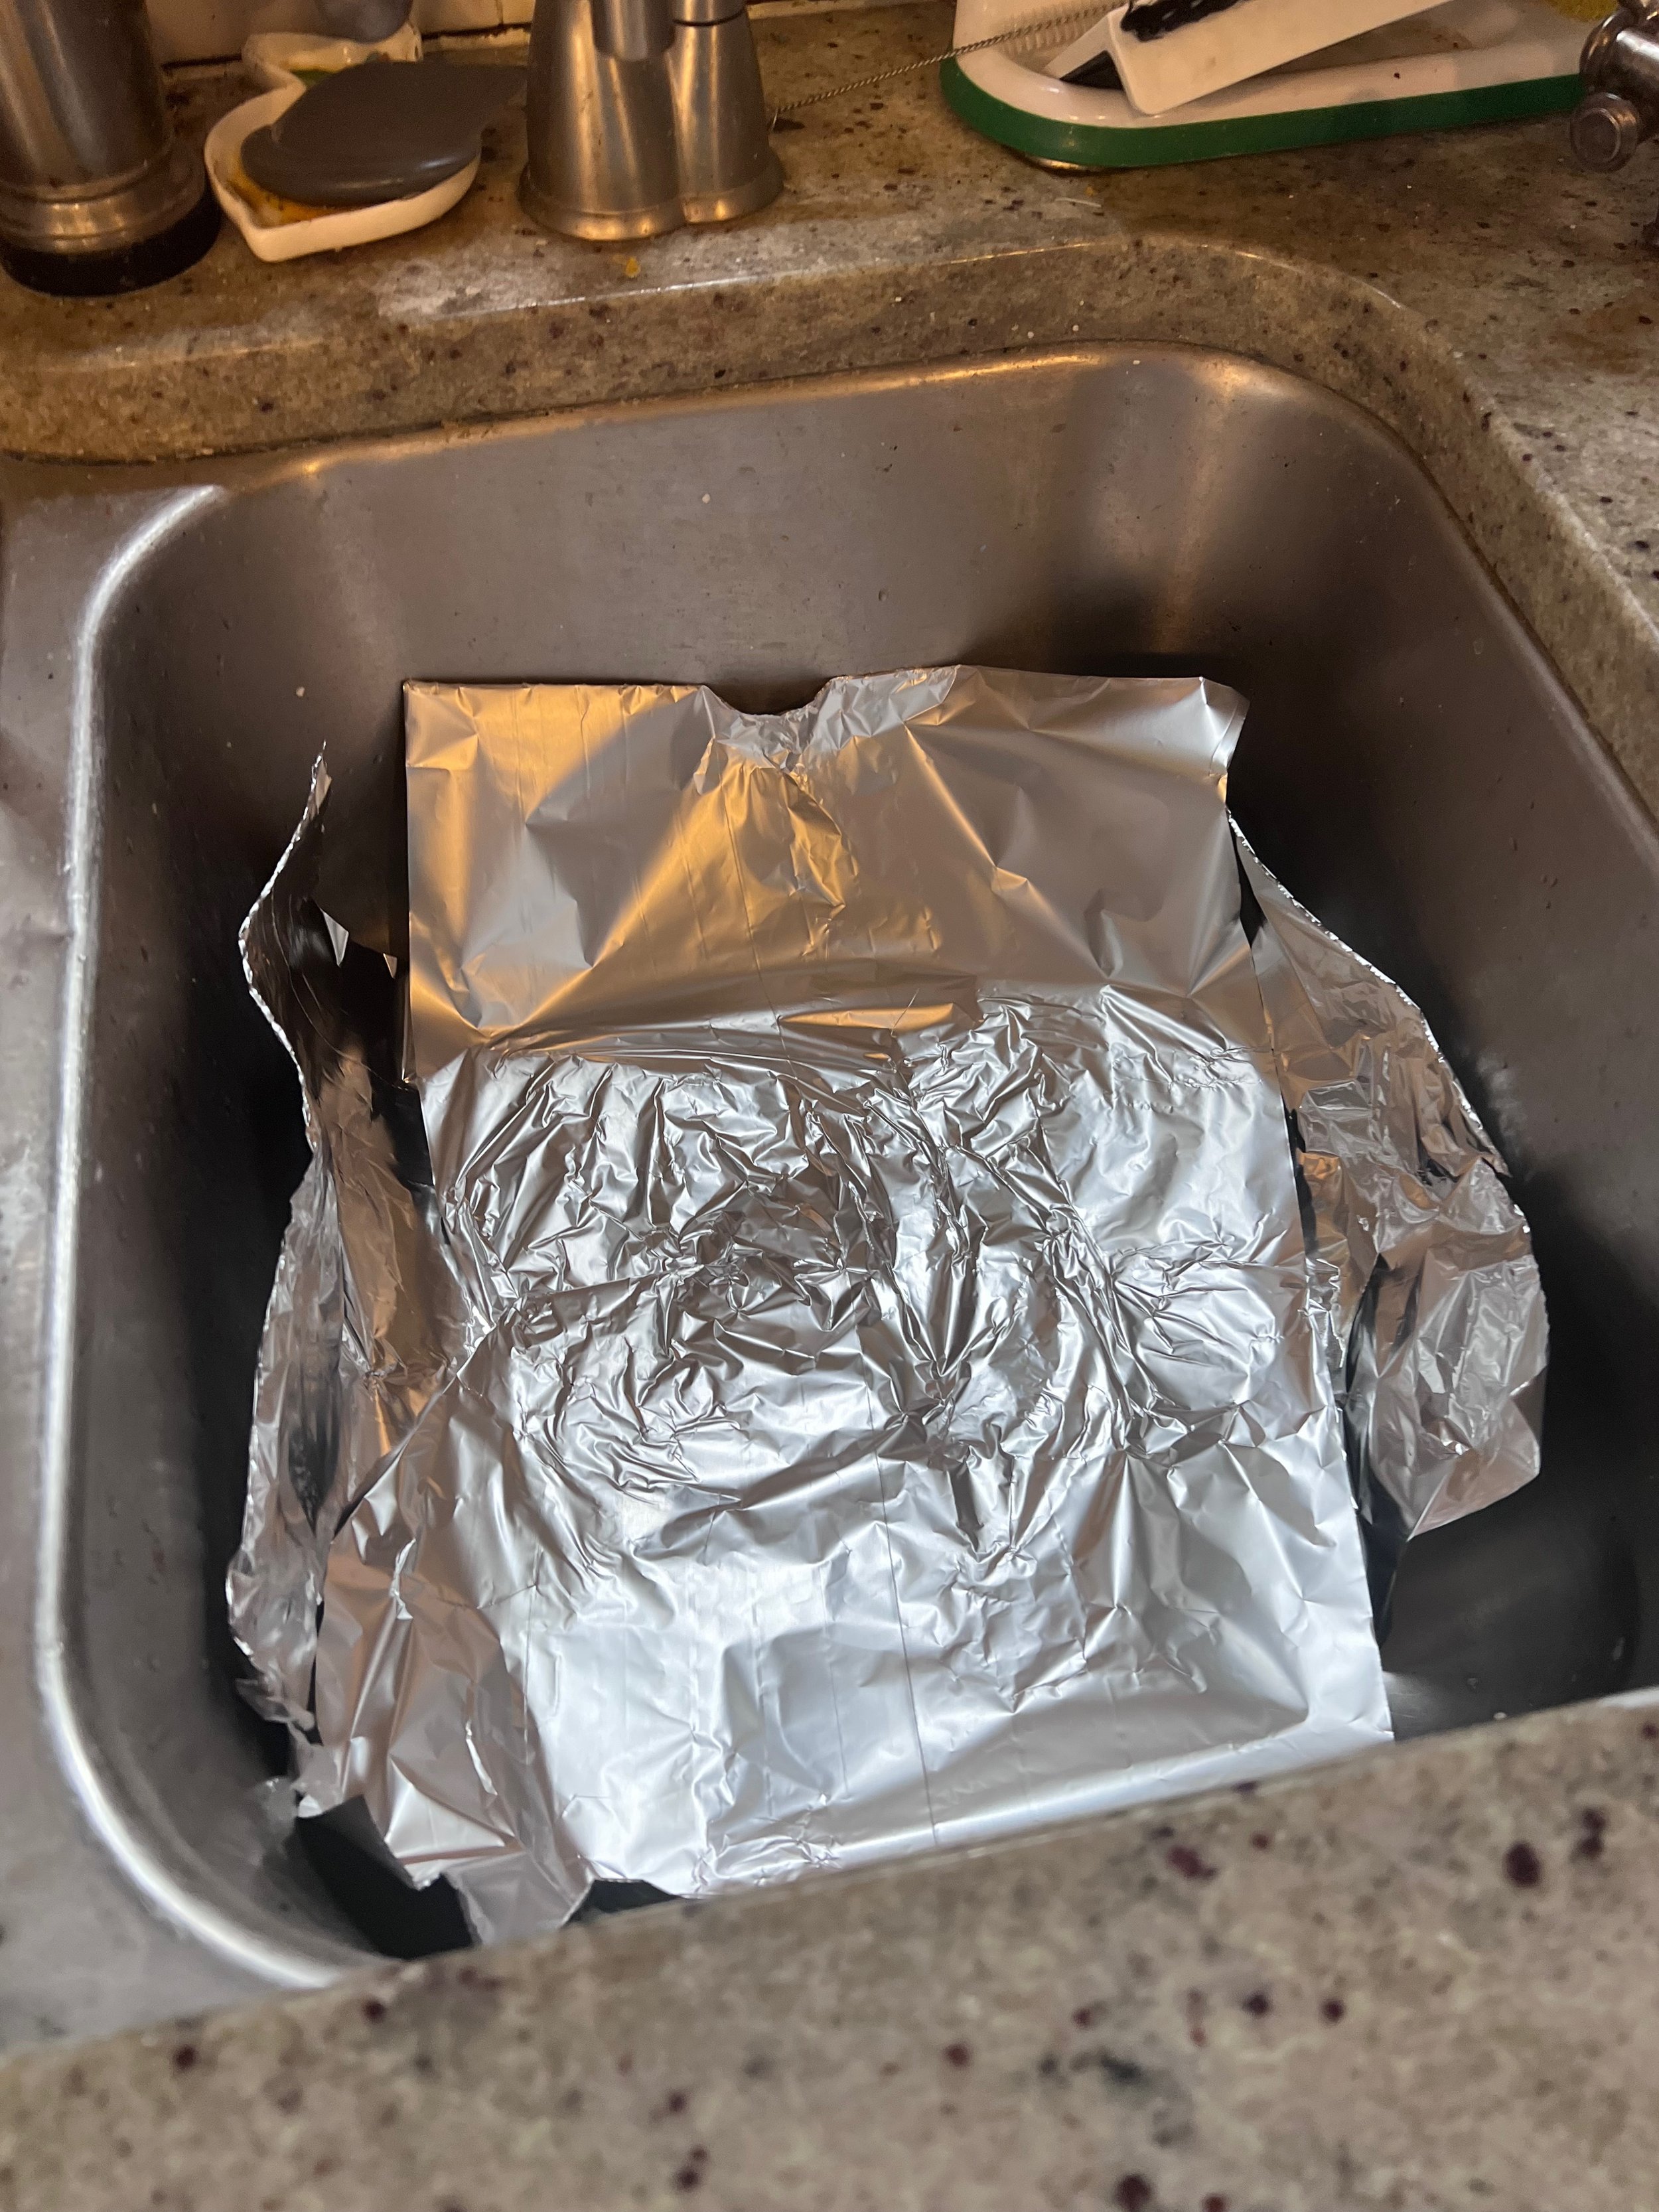 Silverware Cleaning Hack, Polishing silver the easy way.